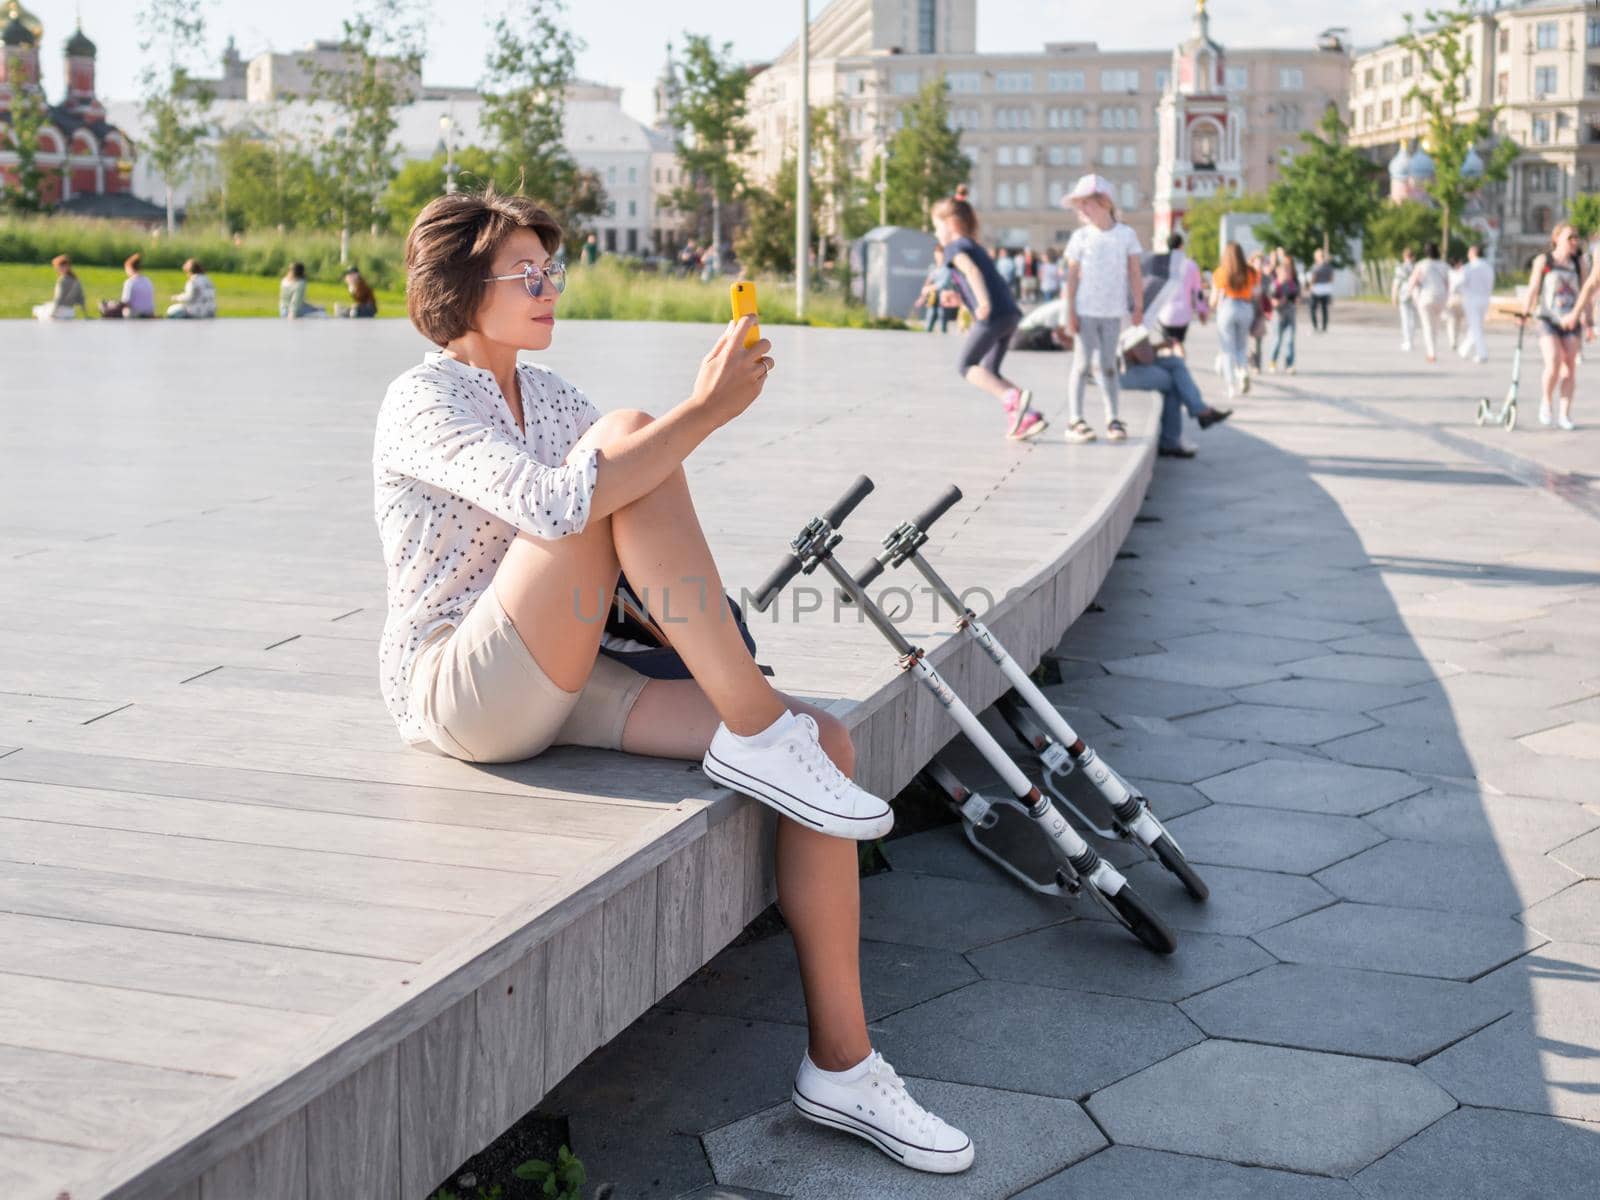 MOSCOW, RUSSIA - June 13, 2021. Woman sits on wooden open stage in public park. Female is making selfie on smartphone after riding kick scooter, eco-friendly urban transport.